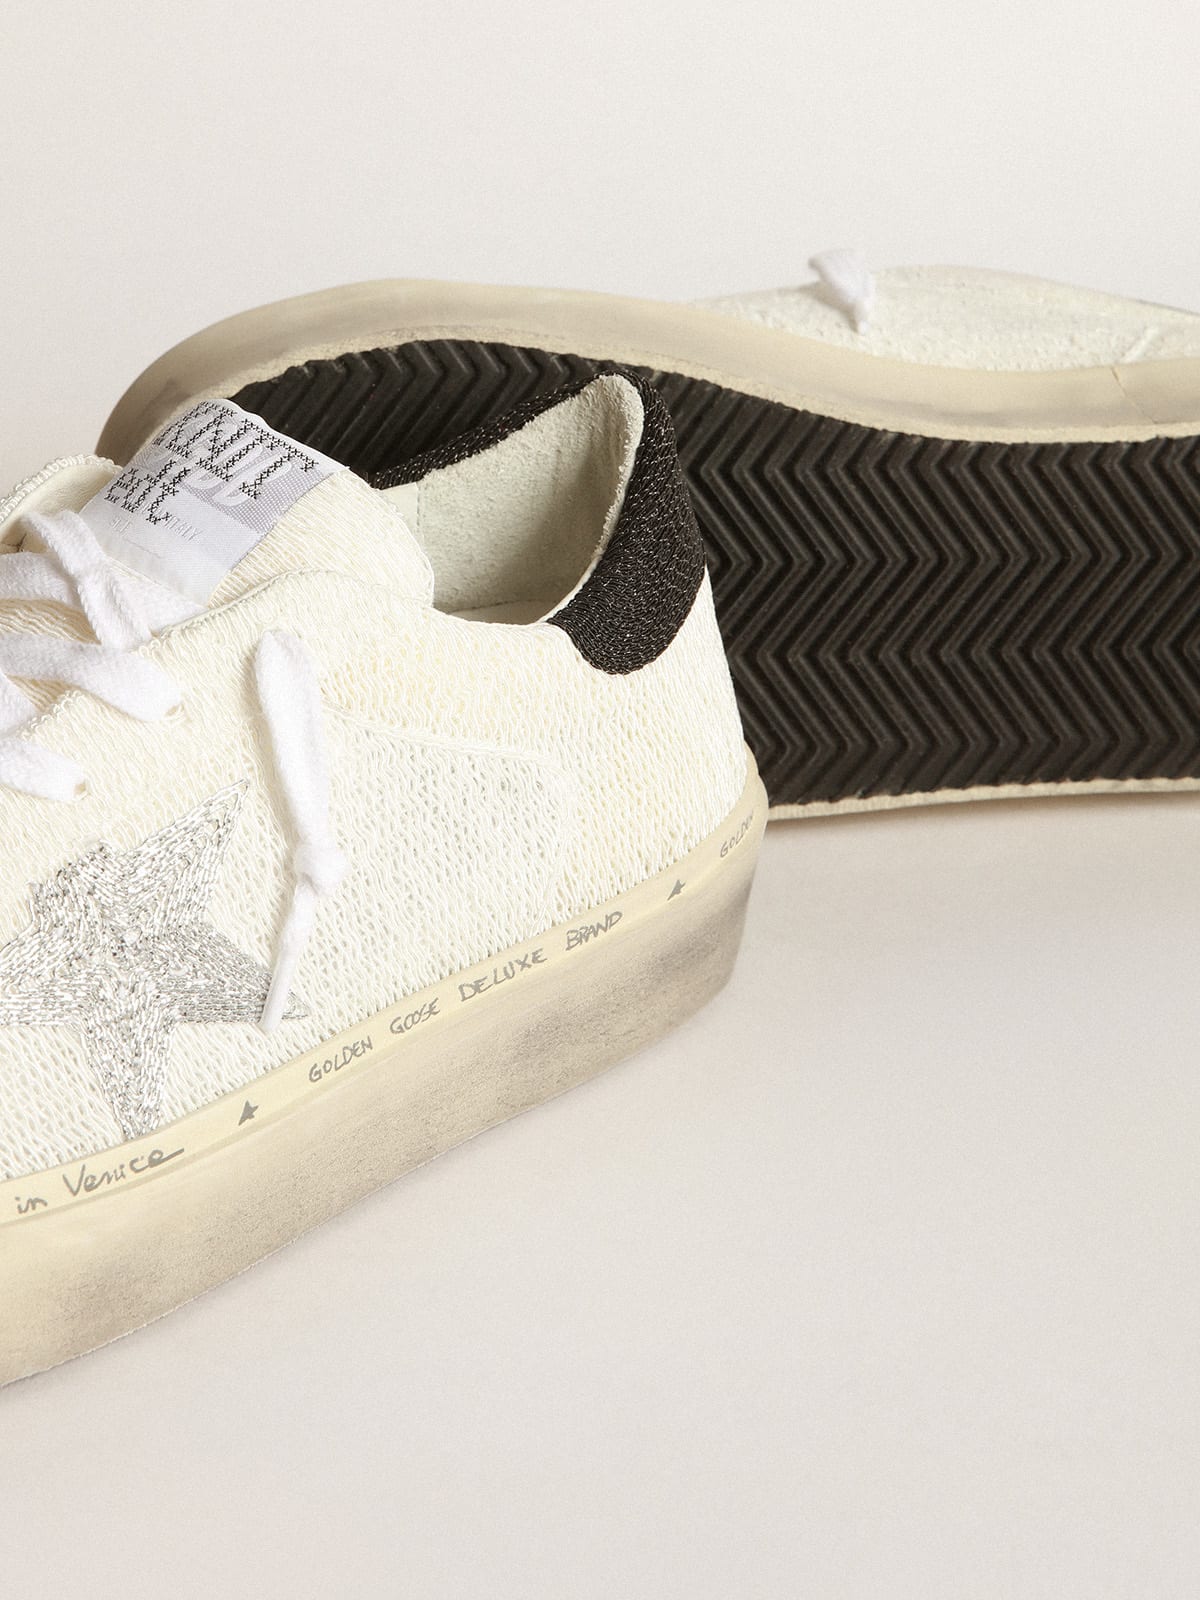 Golden Goose - Hi Star sneakers in white knit with silver knit star and black knit heel tab in 